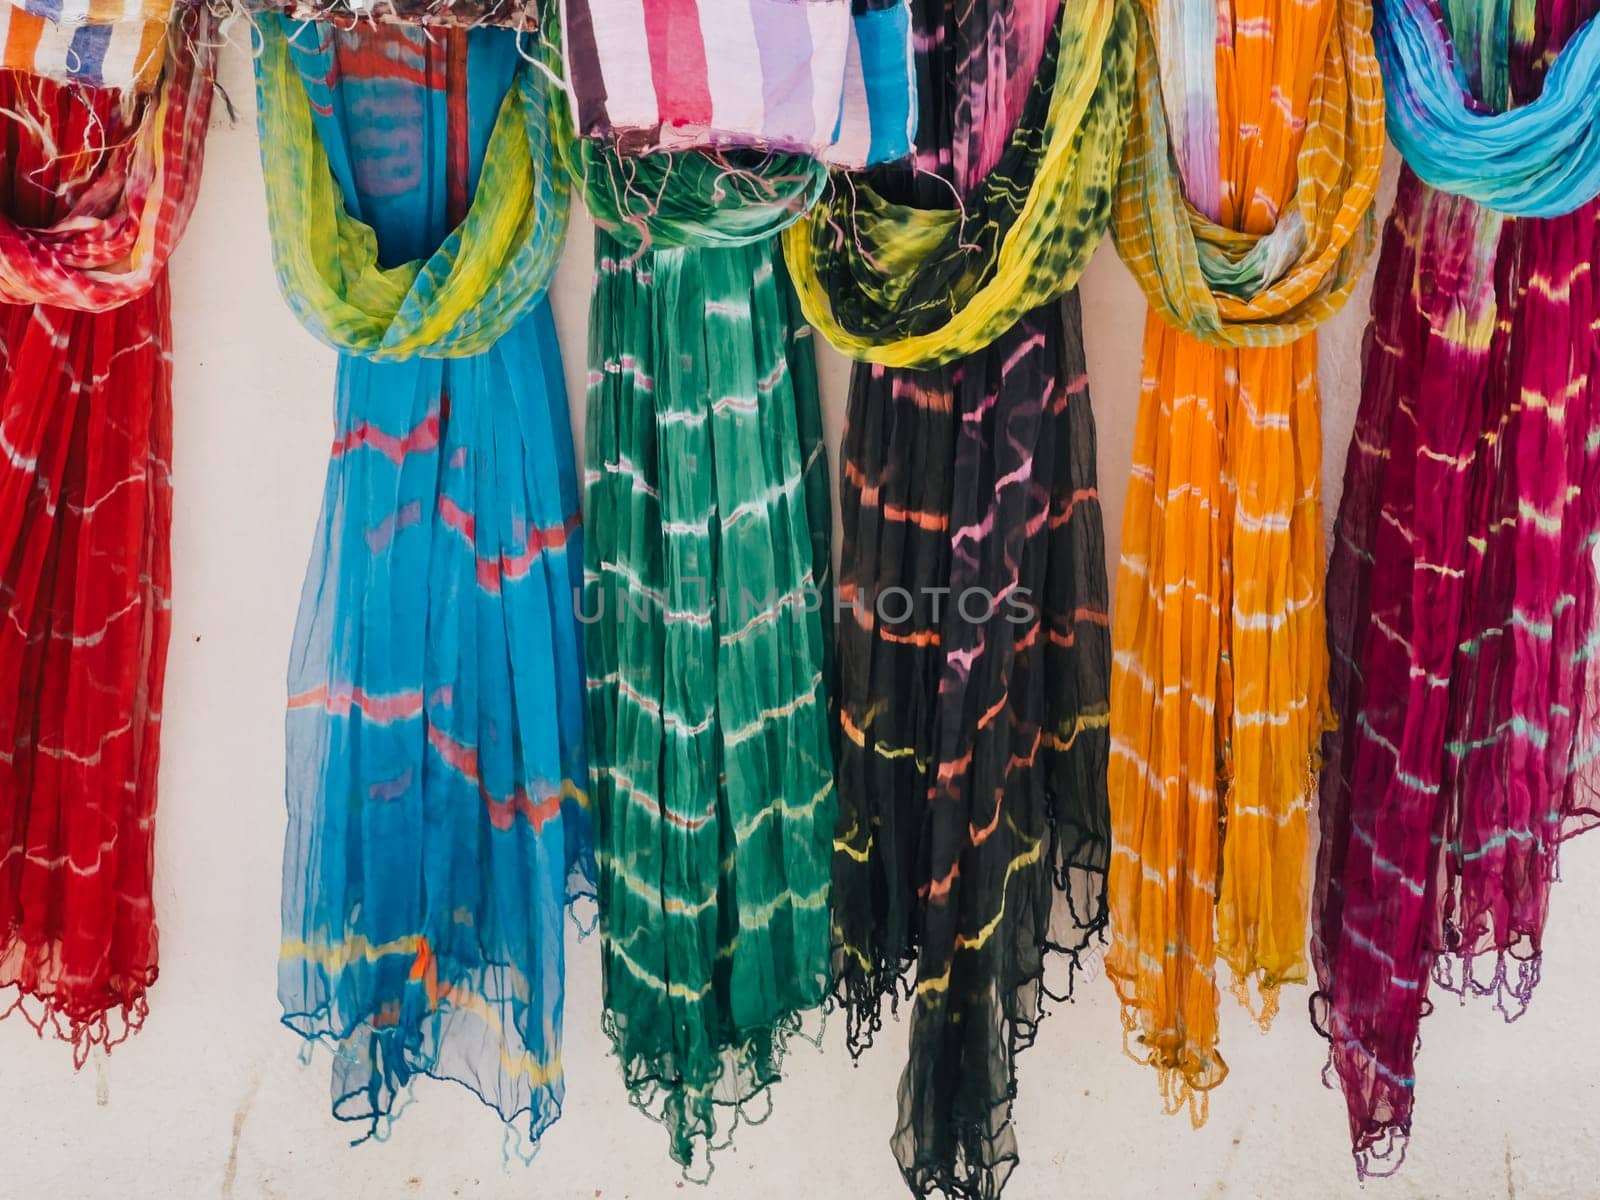 Multi-colored chiffon scarves hang on hangers along a white wall. High quality photo